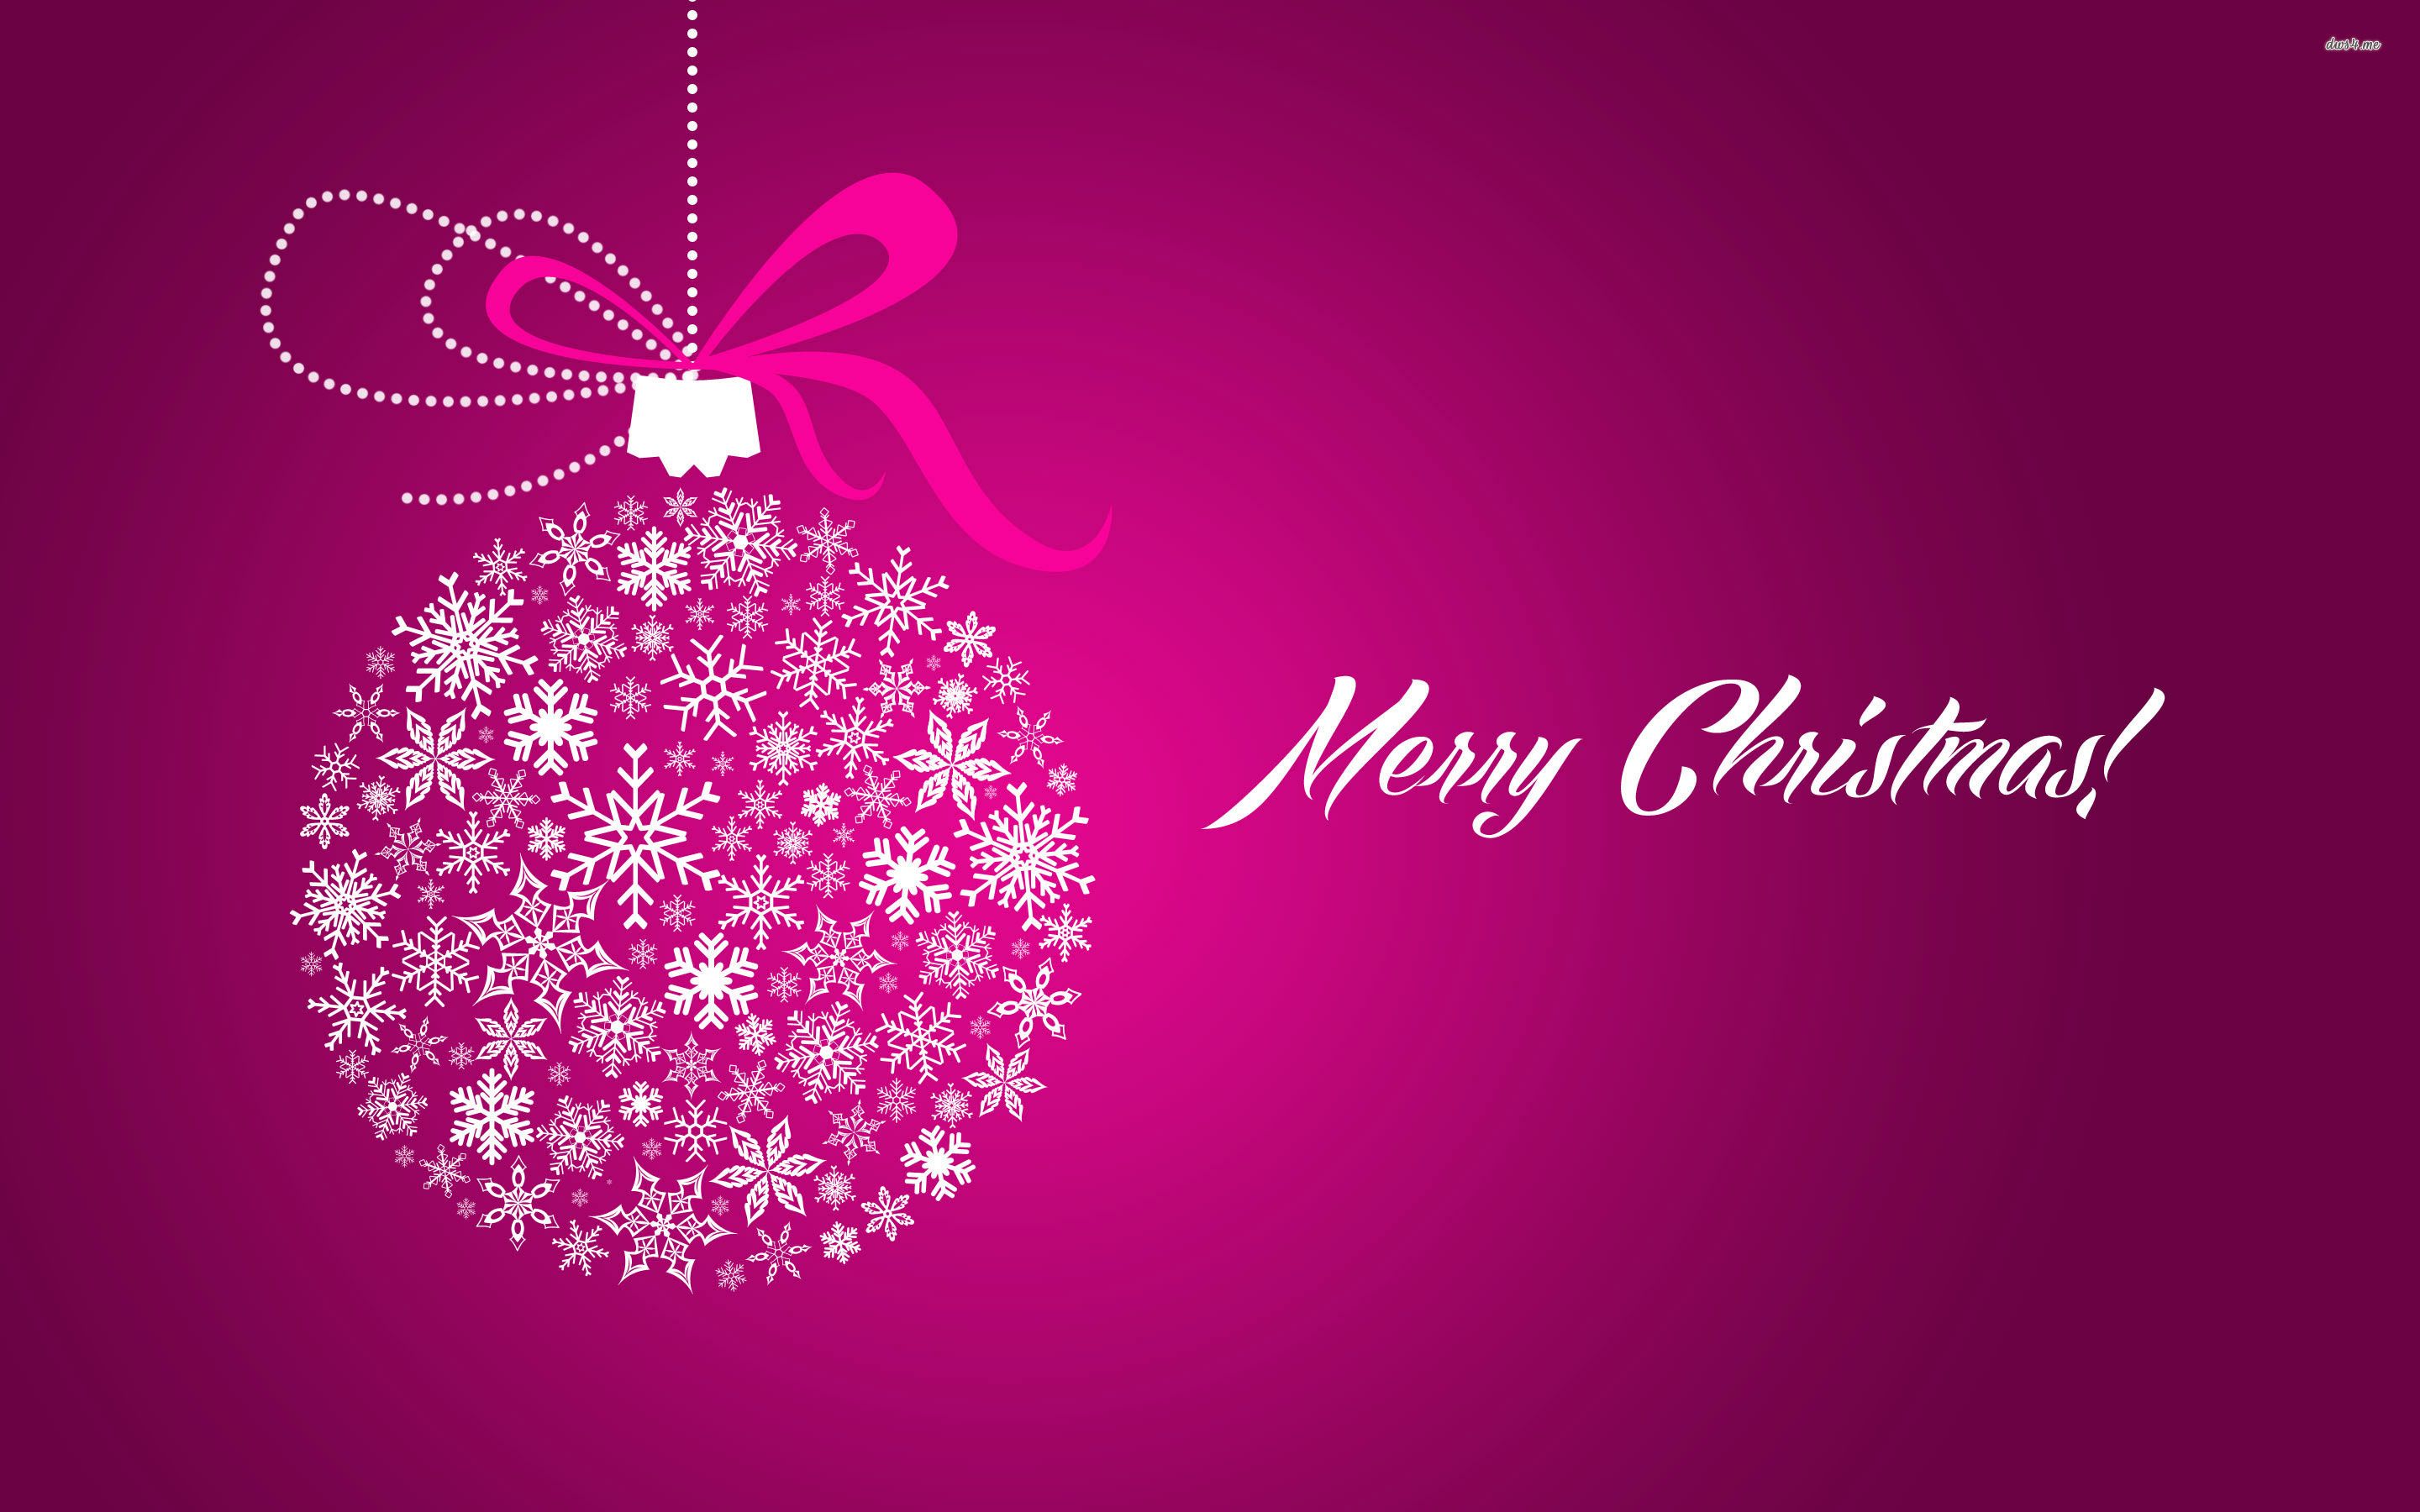 Wallpaper. New Year. photo. picture. Merry Christmas, pink background, the ball, snowflakes